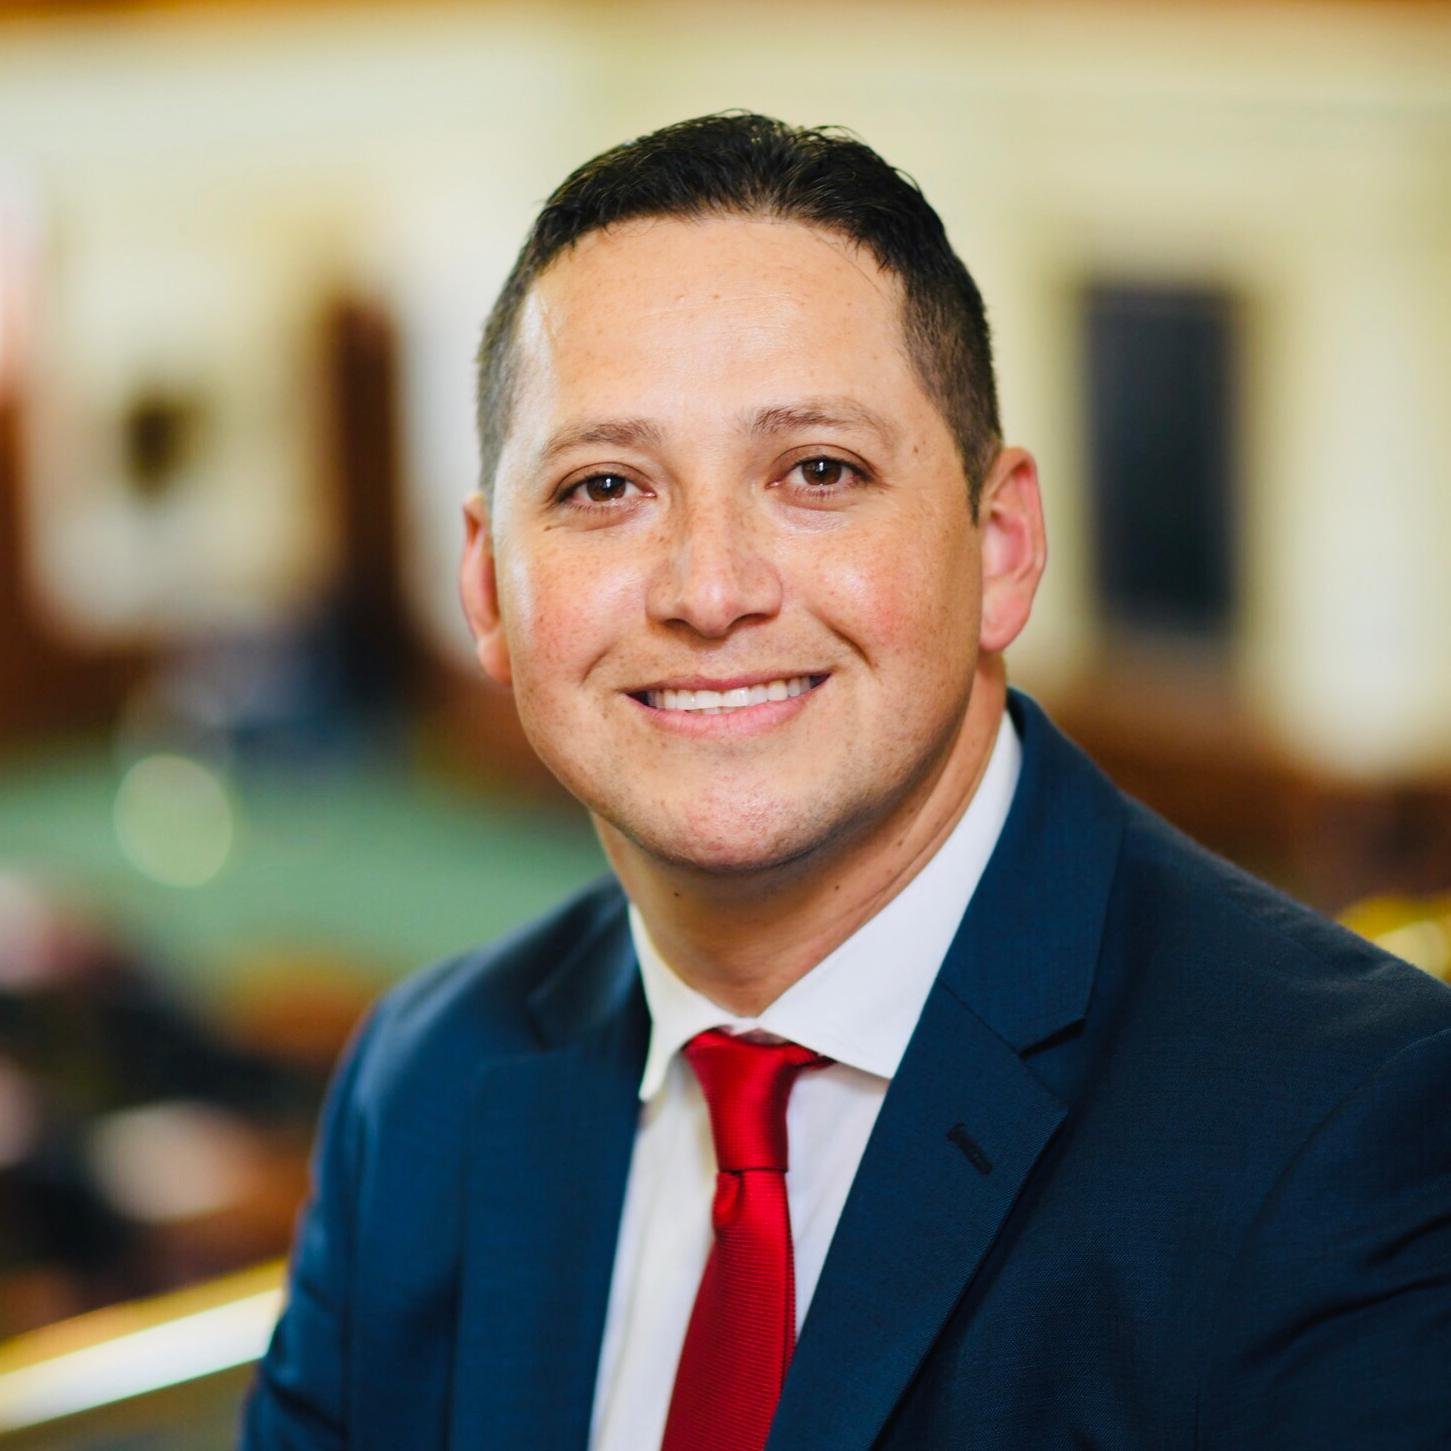 Official Campaign Account for Tony Gonzales for Congress. All posts are from the campaign unless signed - TG.